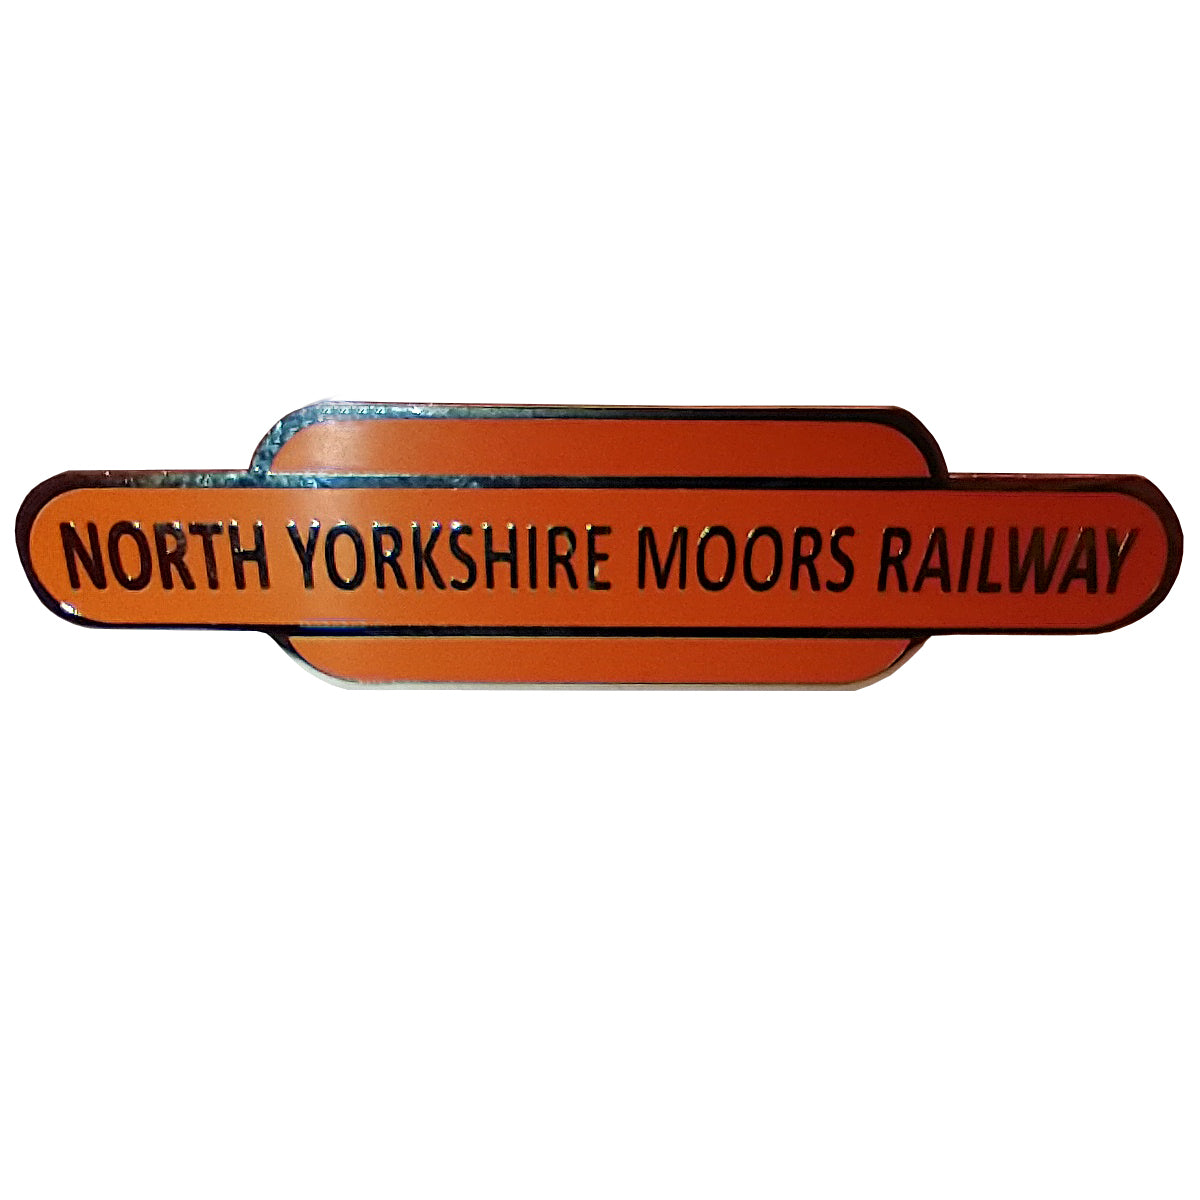 A long oblong totem shaped brooch on orange enamel and silver coloured metal which marks out the edges and the text NORTH YORKSHIRE MOORS RAILWAY